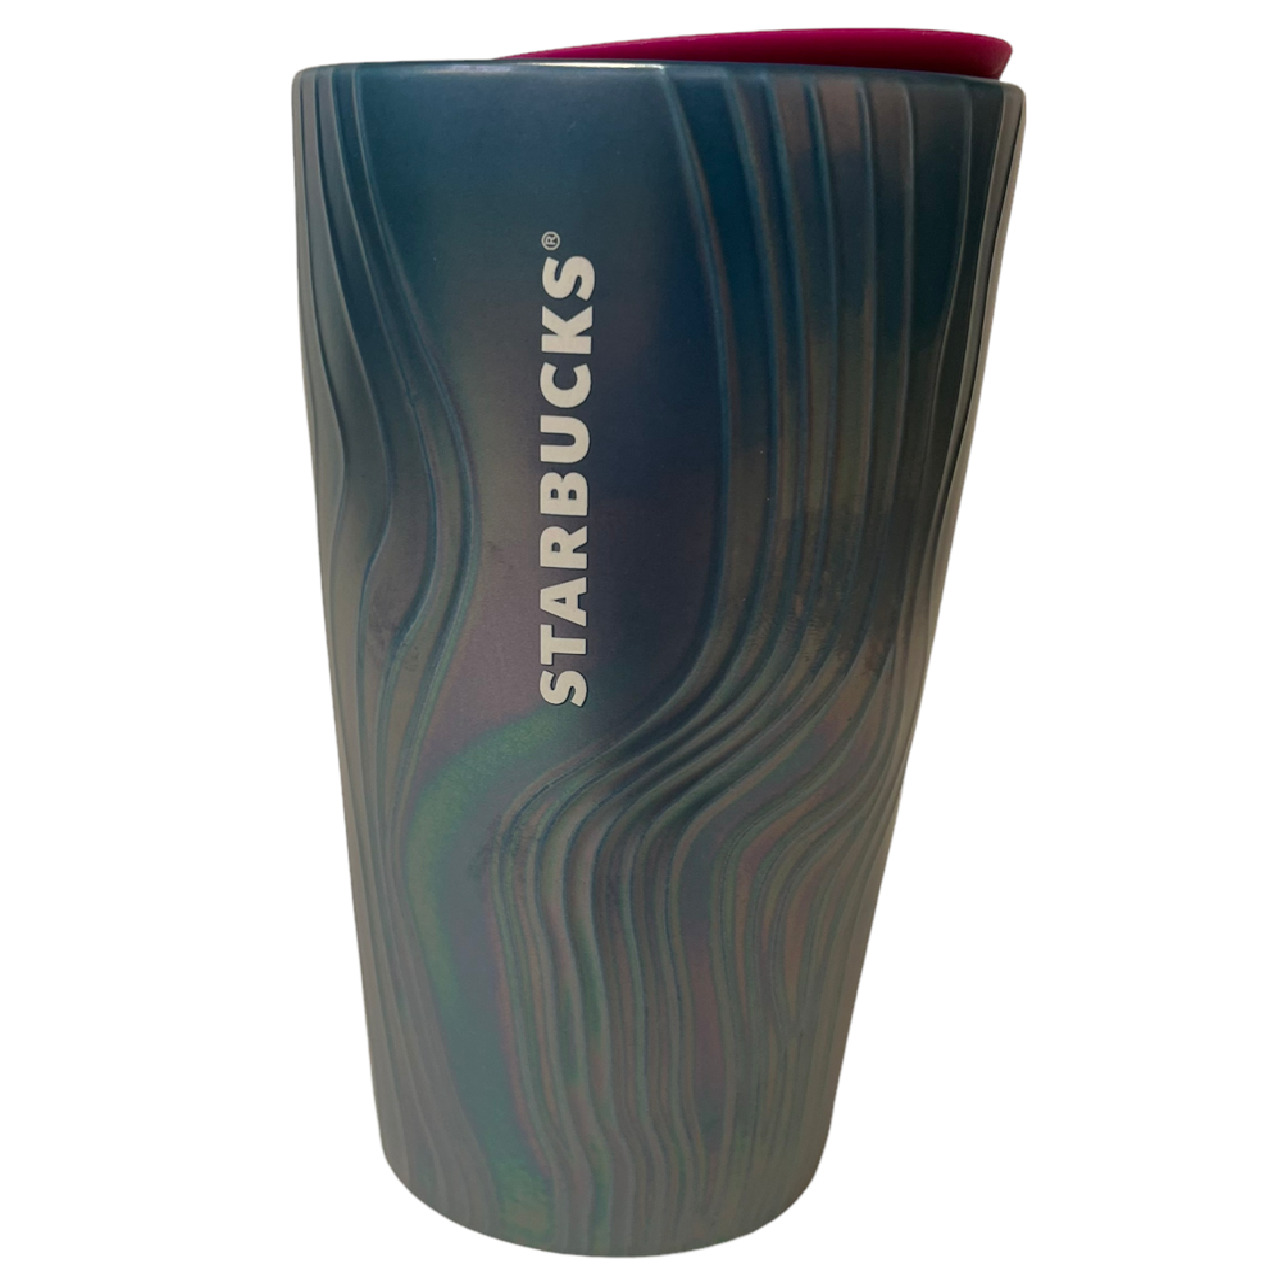 Starbucks Ceramic Cup 2022 Spring Blue Teal Swirl 12 Ounce Tumbler Pink Lid New